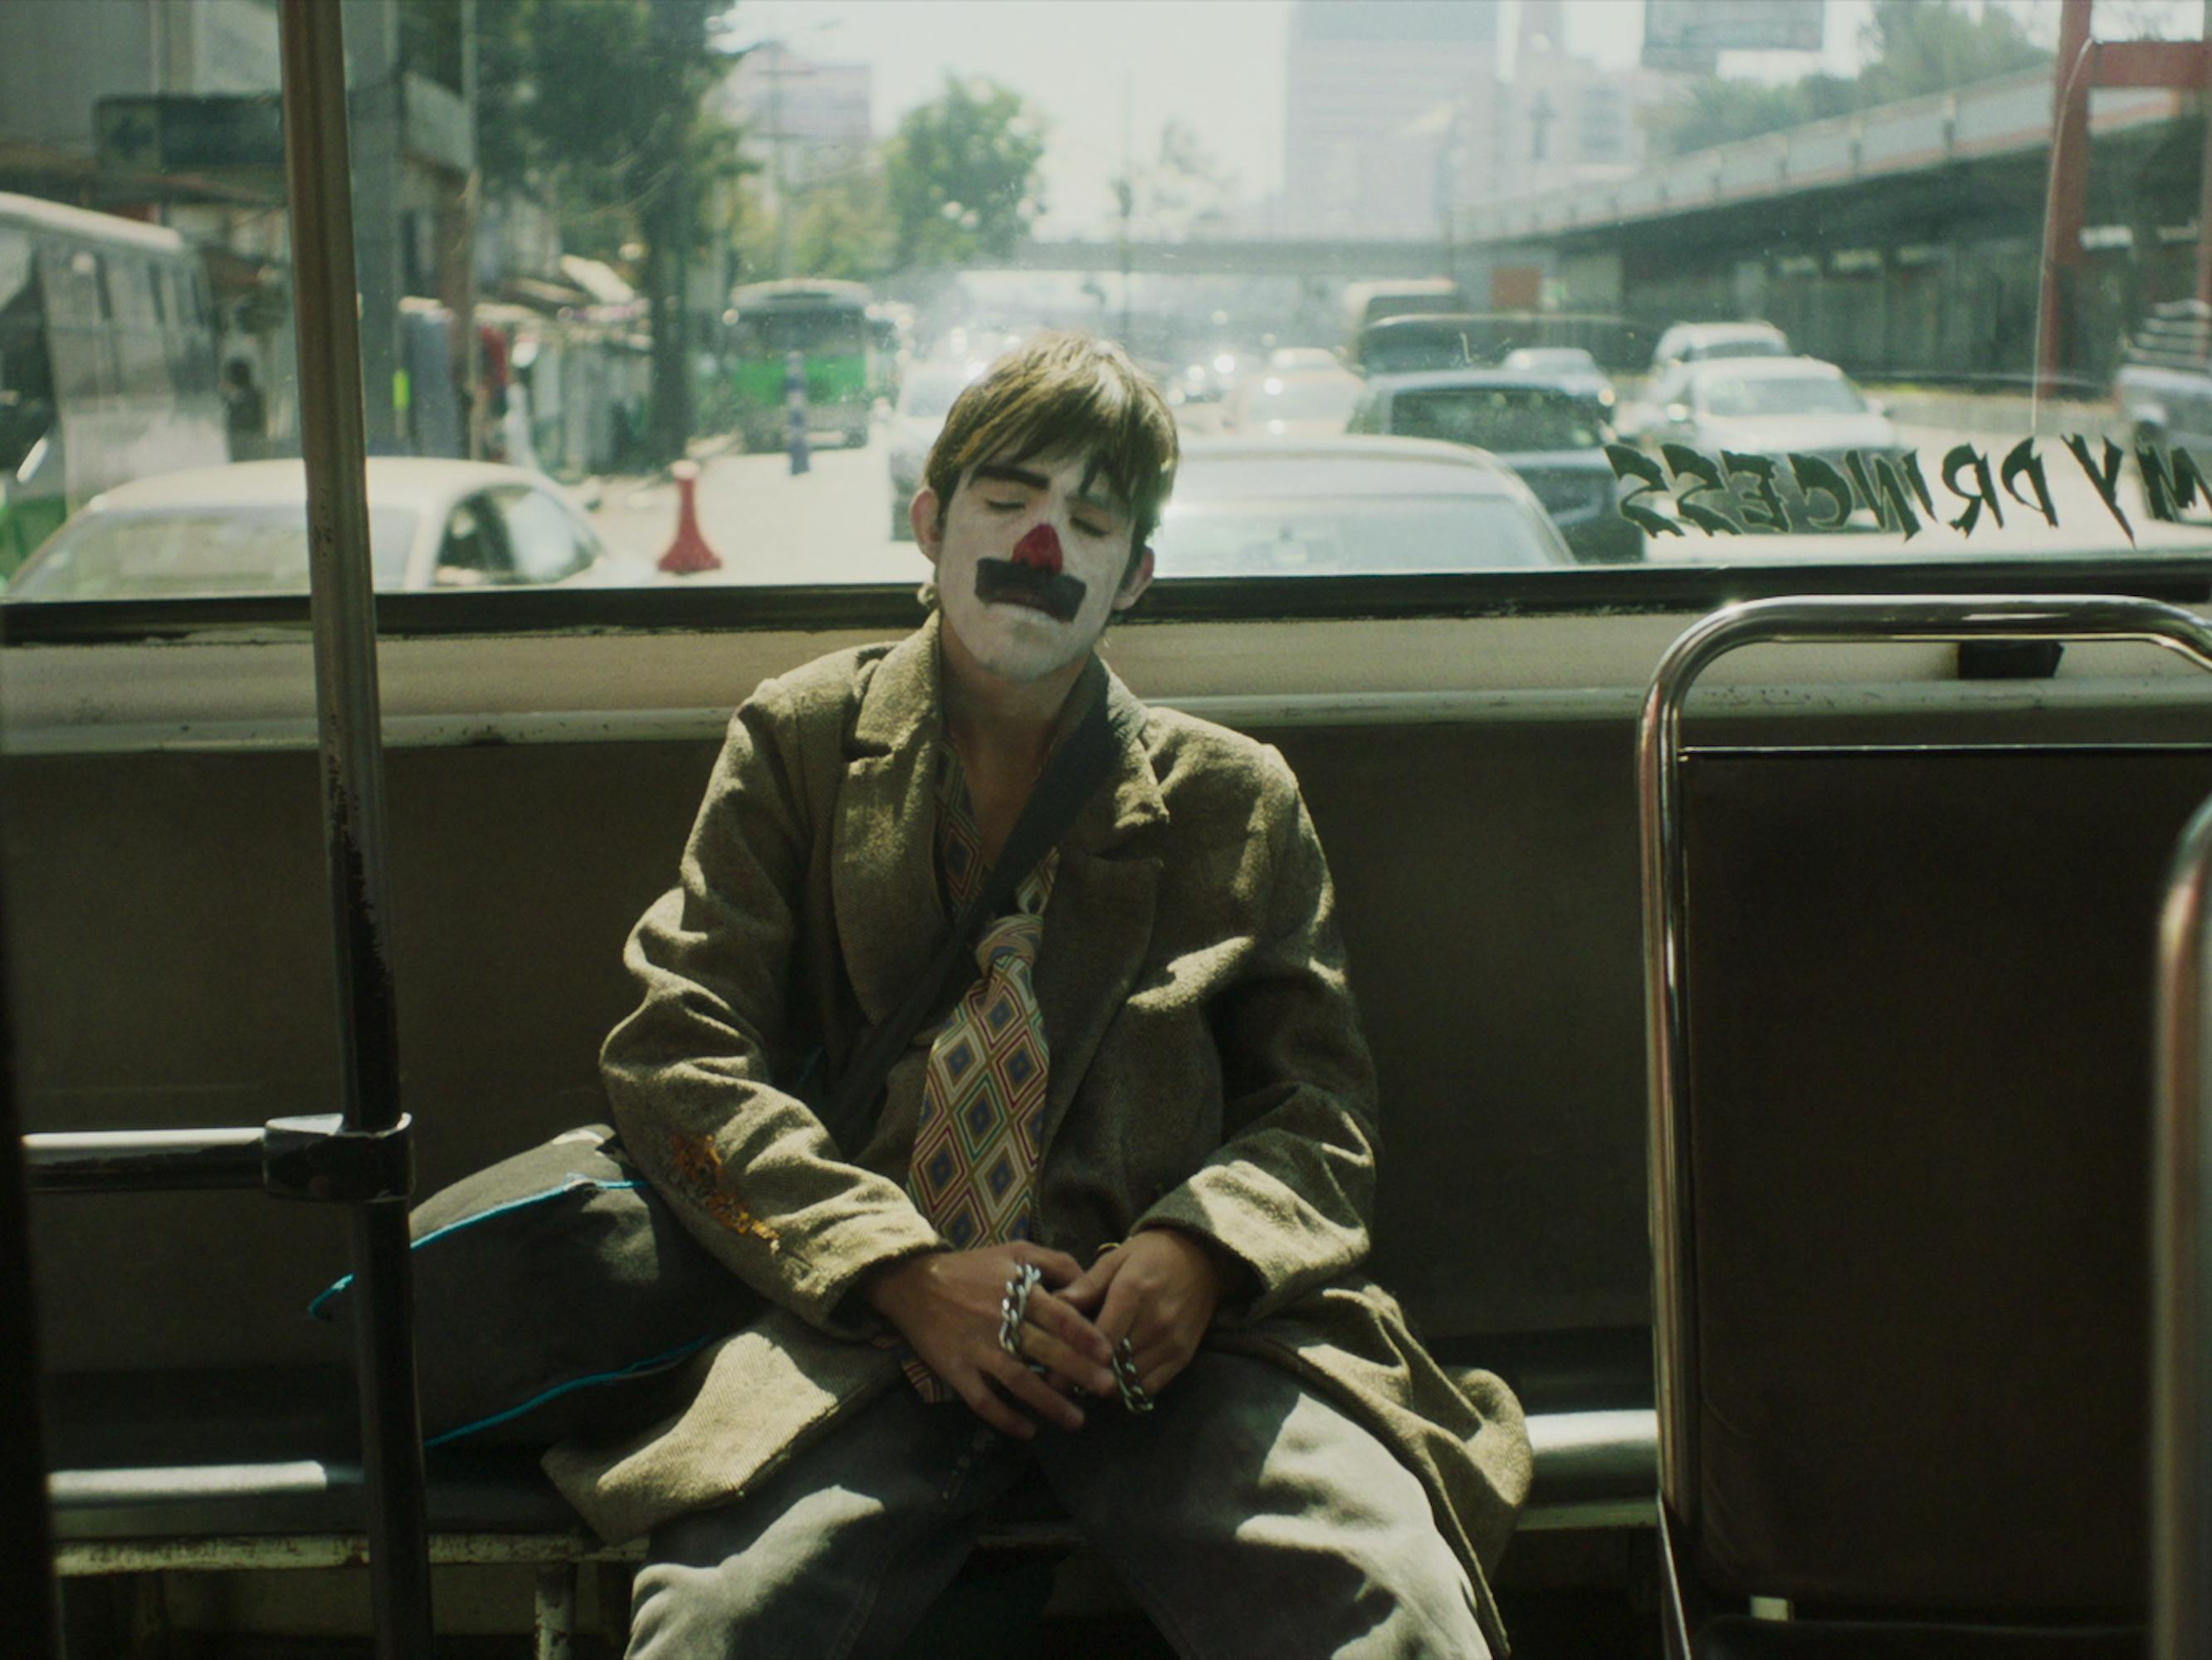 A character from Chicuarotes sits in the back of the bus in a joker-esque outfit.